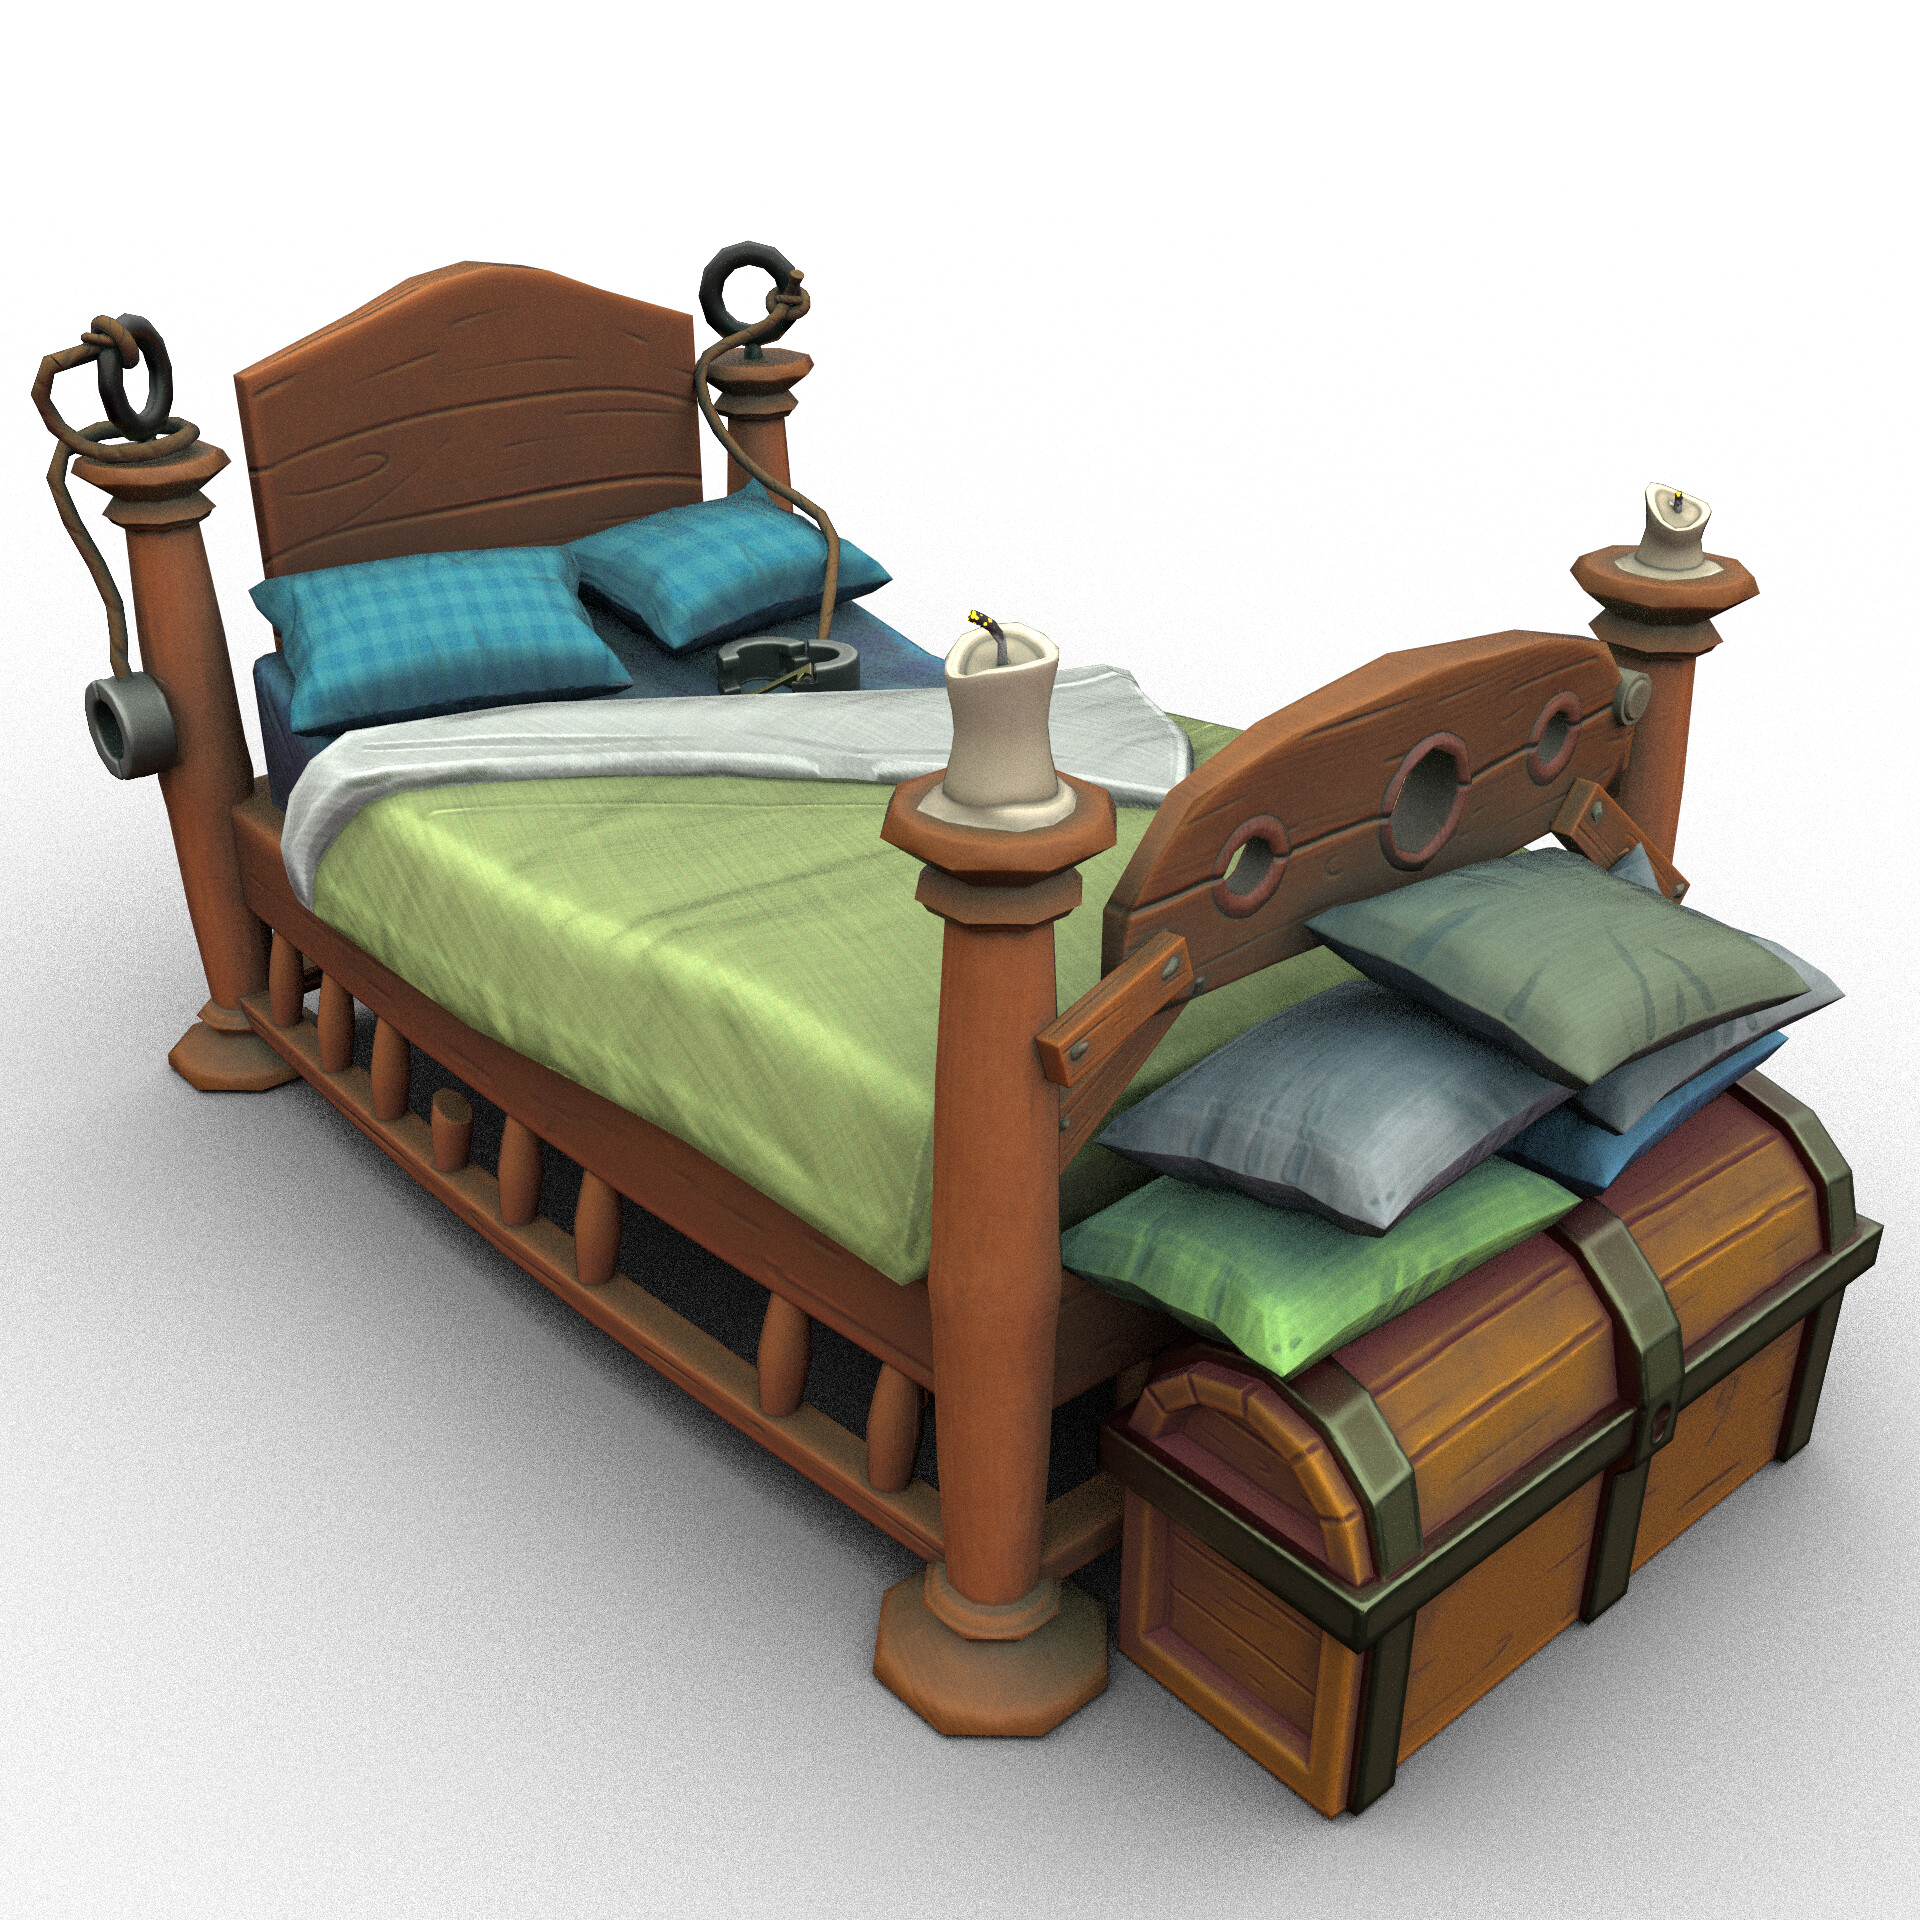 Don Vo - Mildly Spicy Stylized Bed